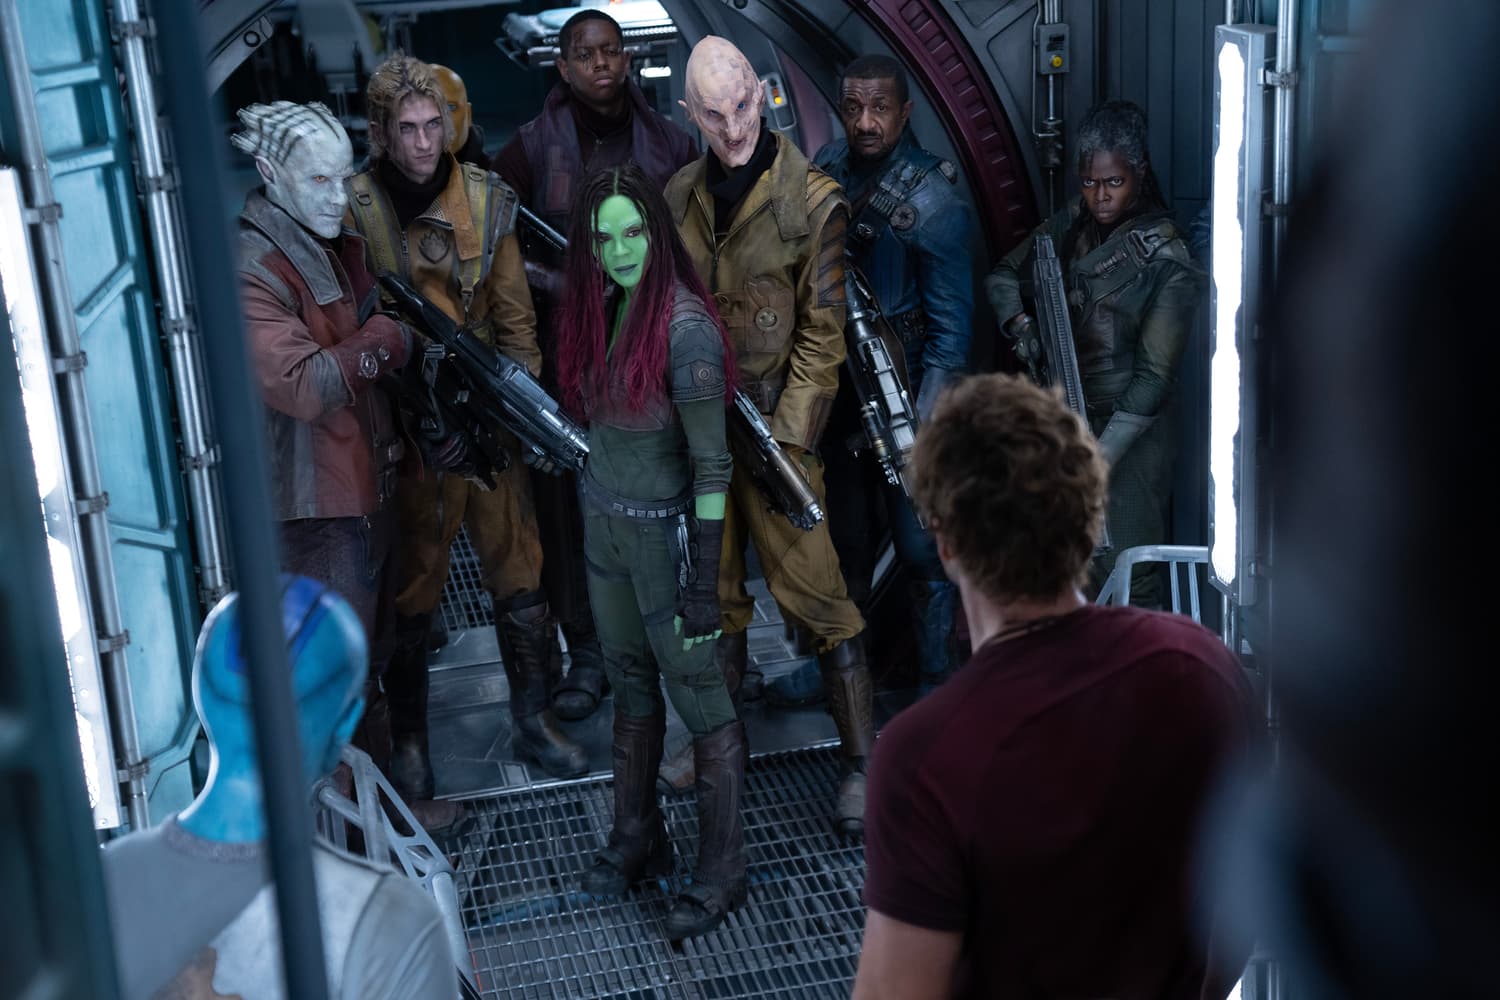 The Guardians of the Galaxy visit the Ravagers.